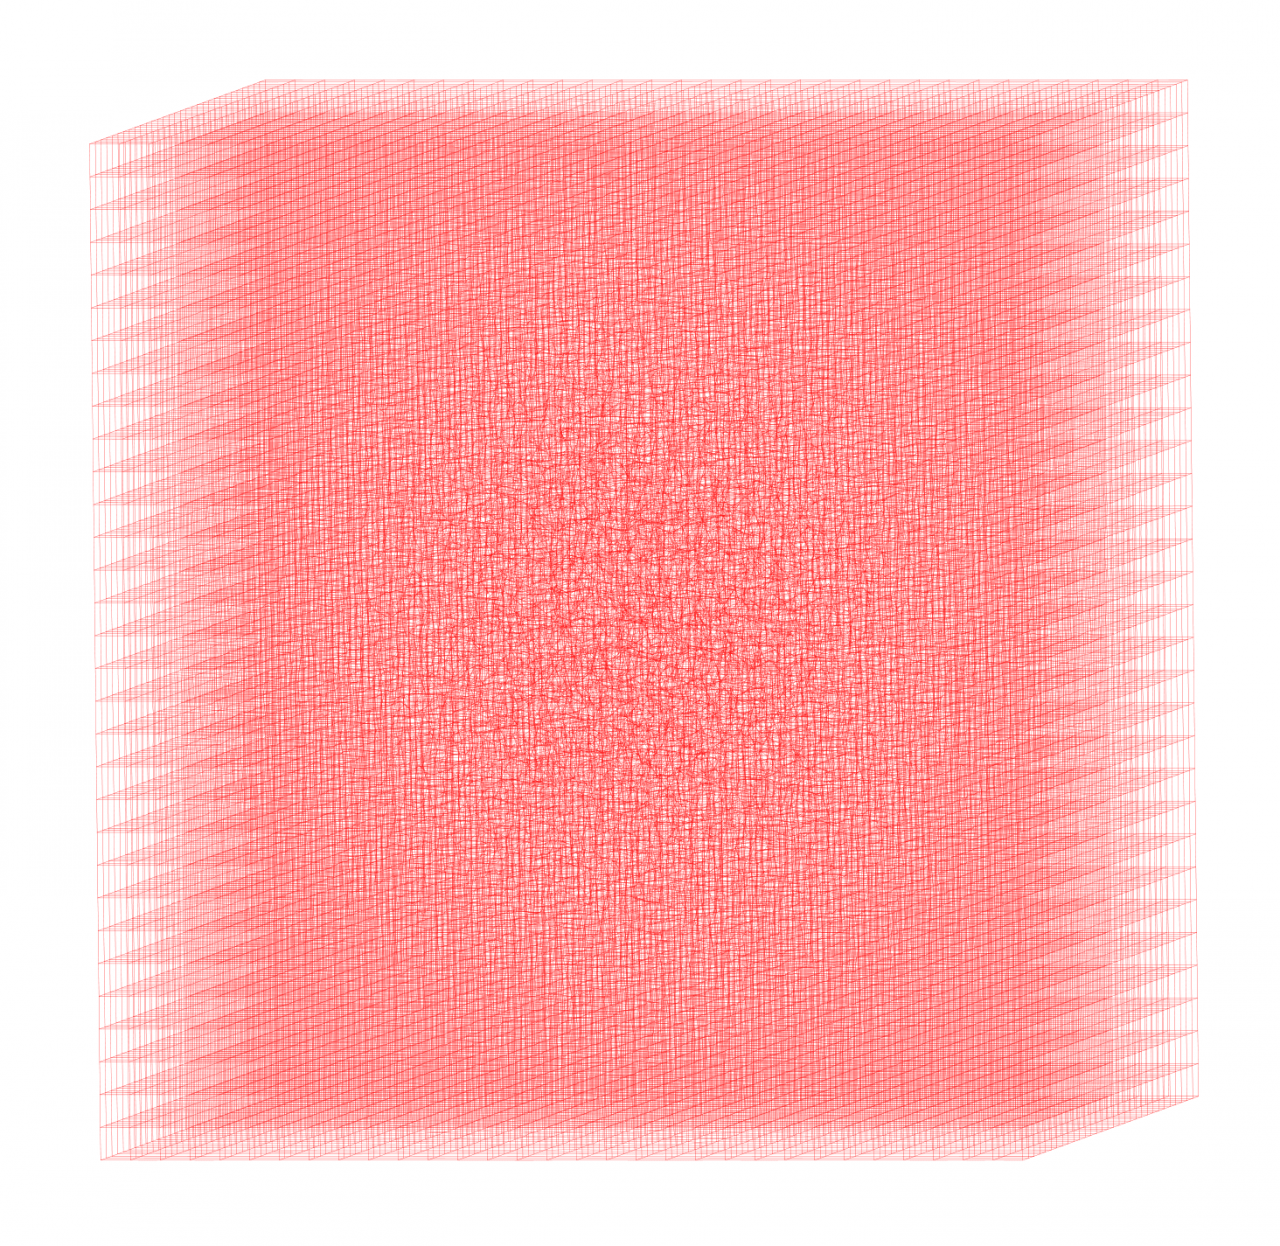 Three-dimensional body of red grid lines